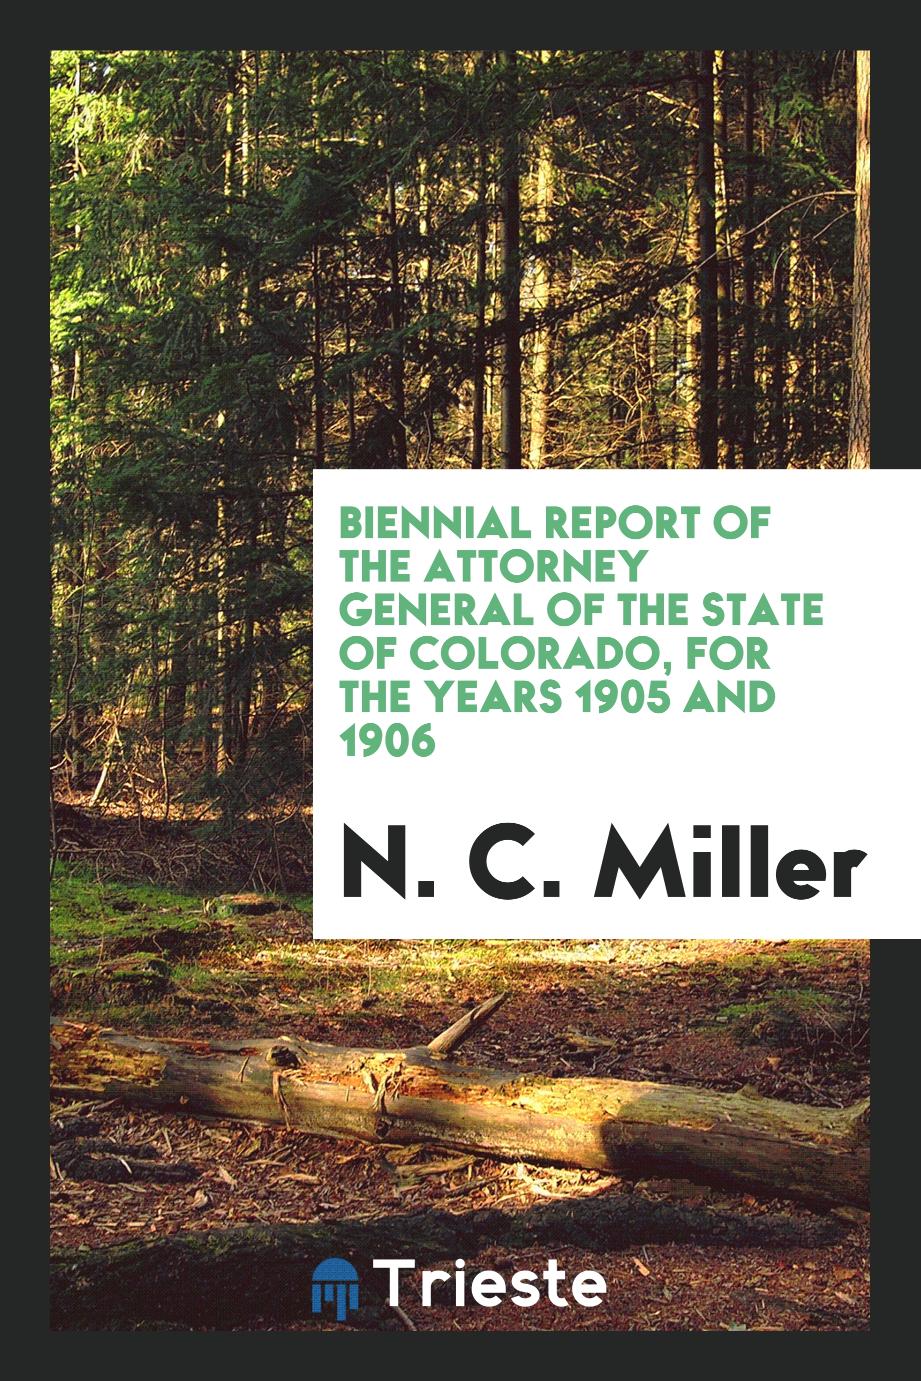 Biennial Report of the Attorney General of the State of Colorado, for the Years 1905 and 1906